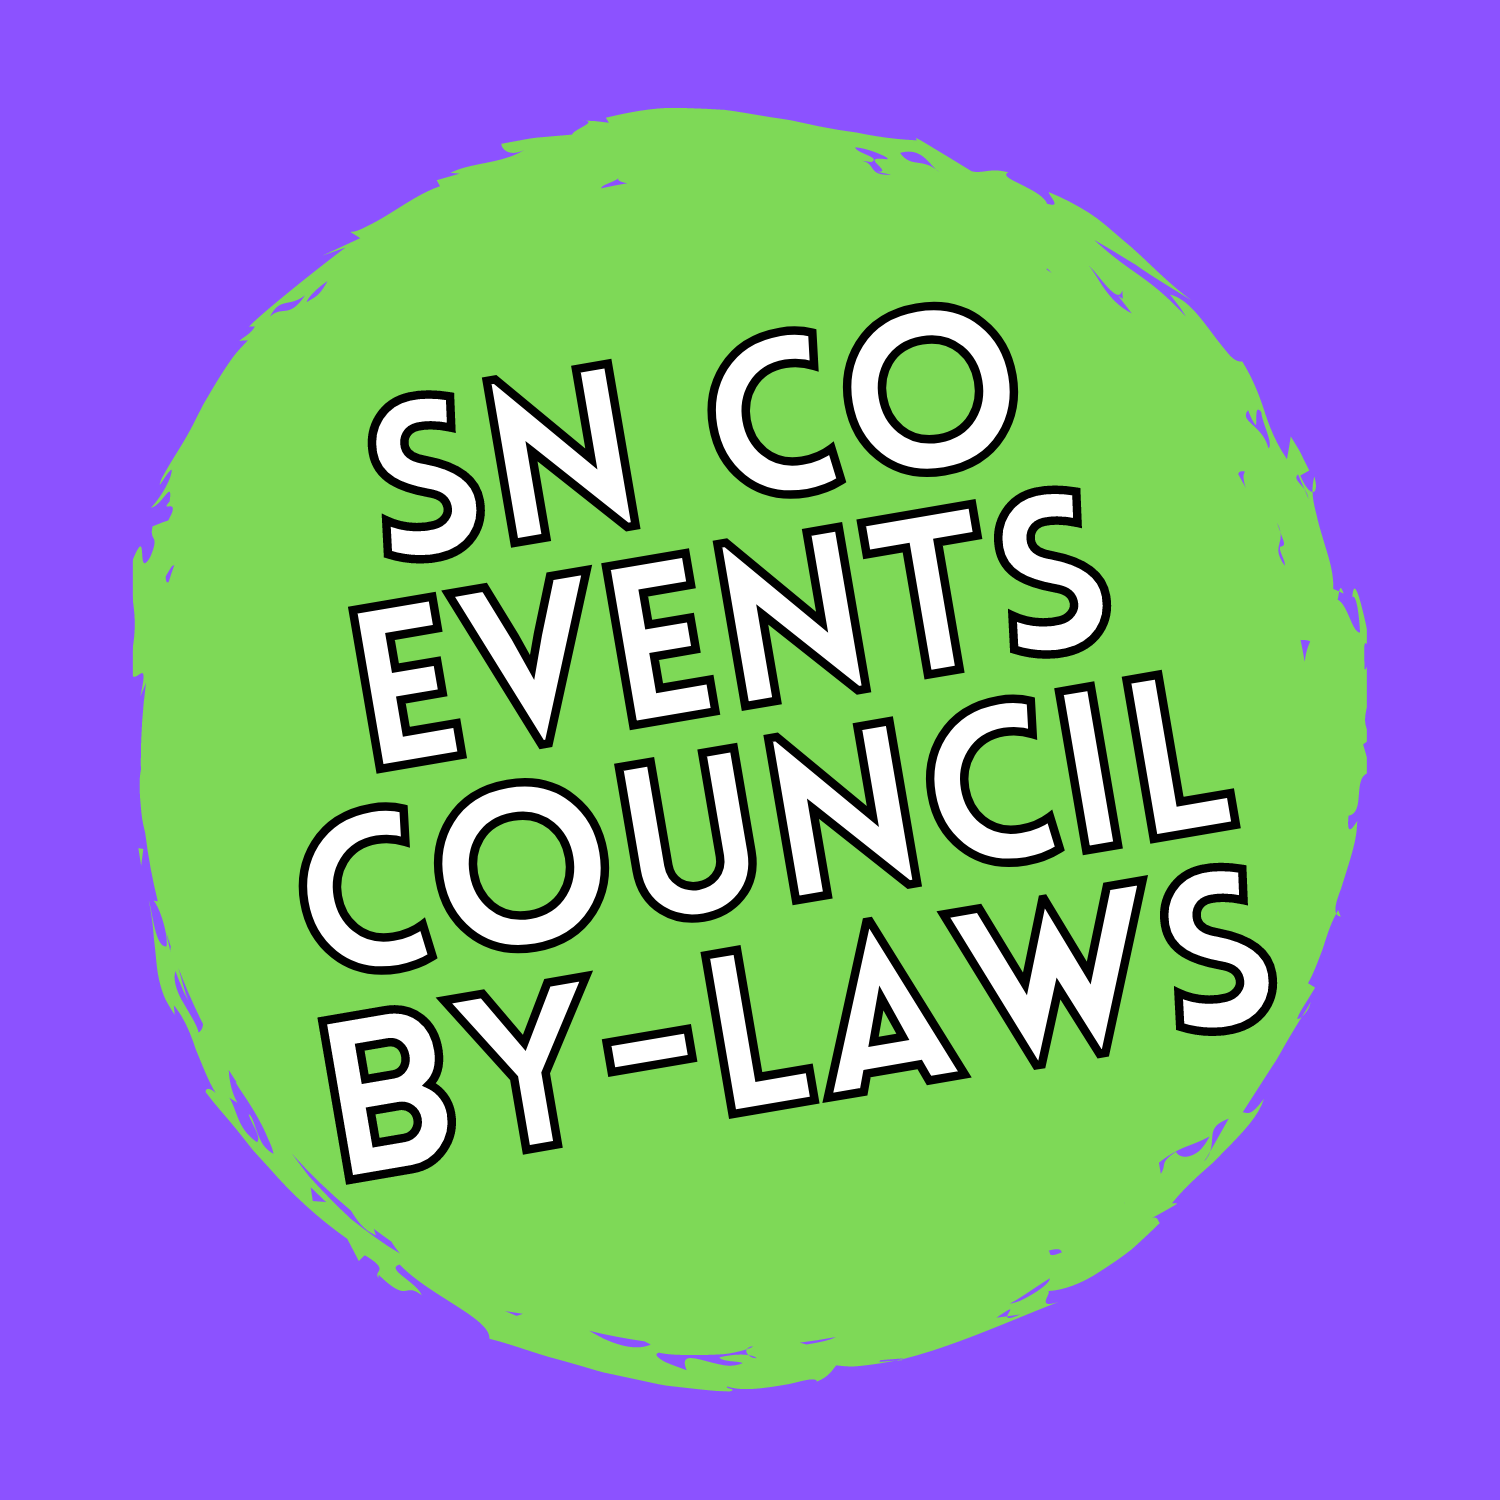 Events Council By-Laws